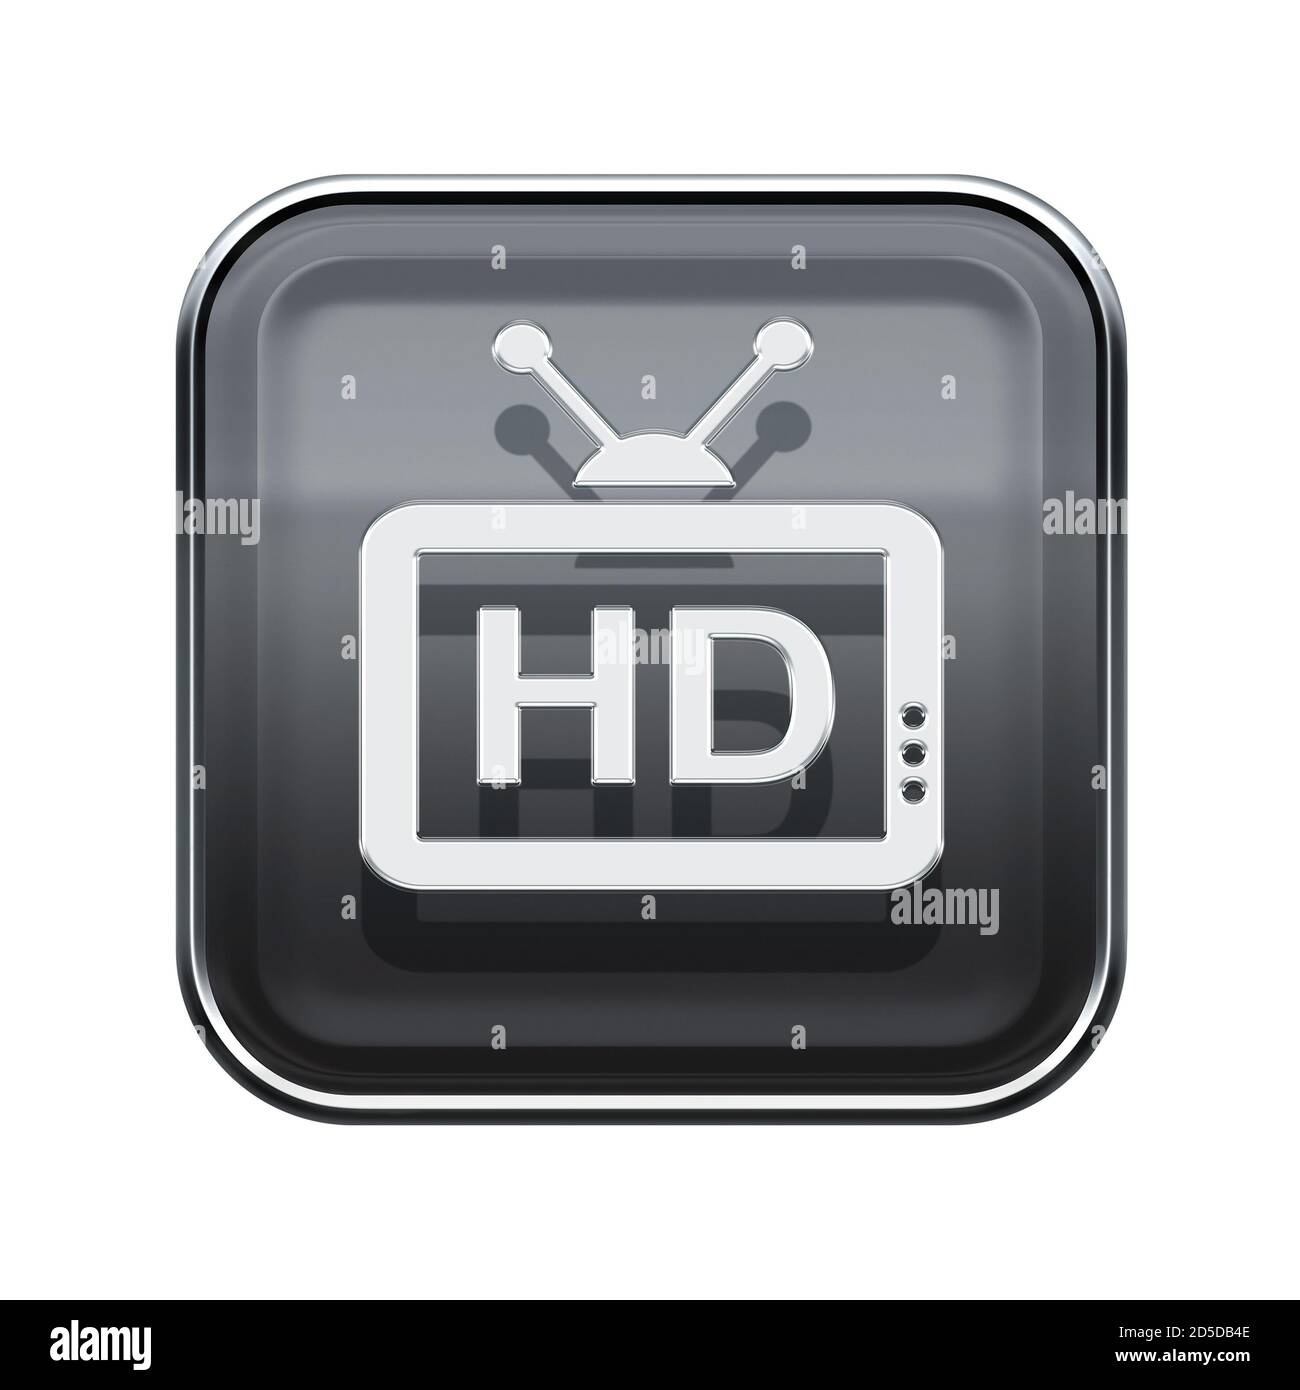 HD icon glossy grey, isolated on white background Stock Photo